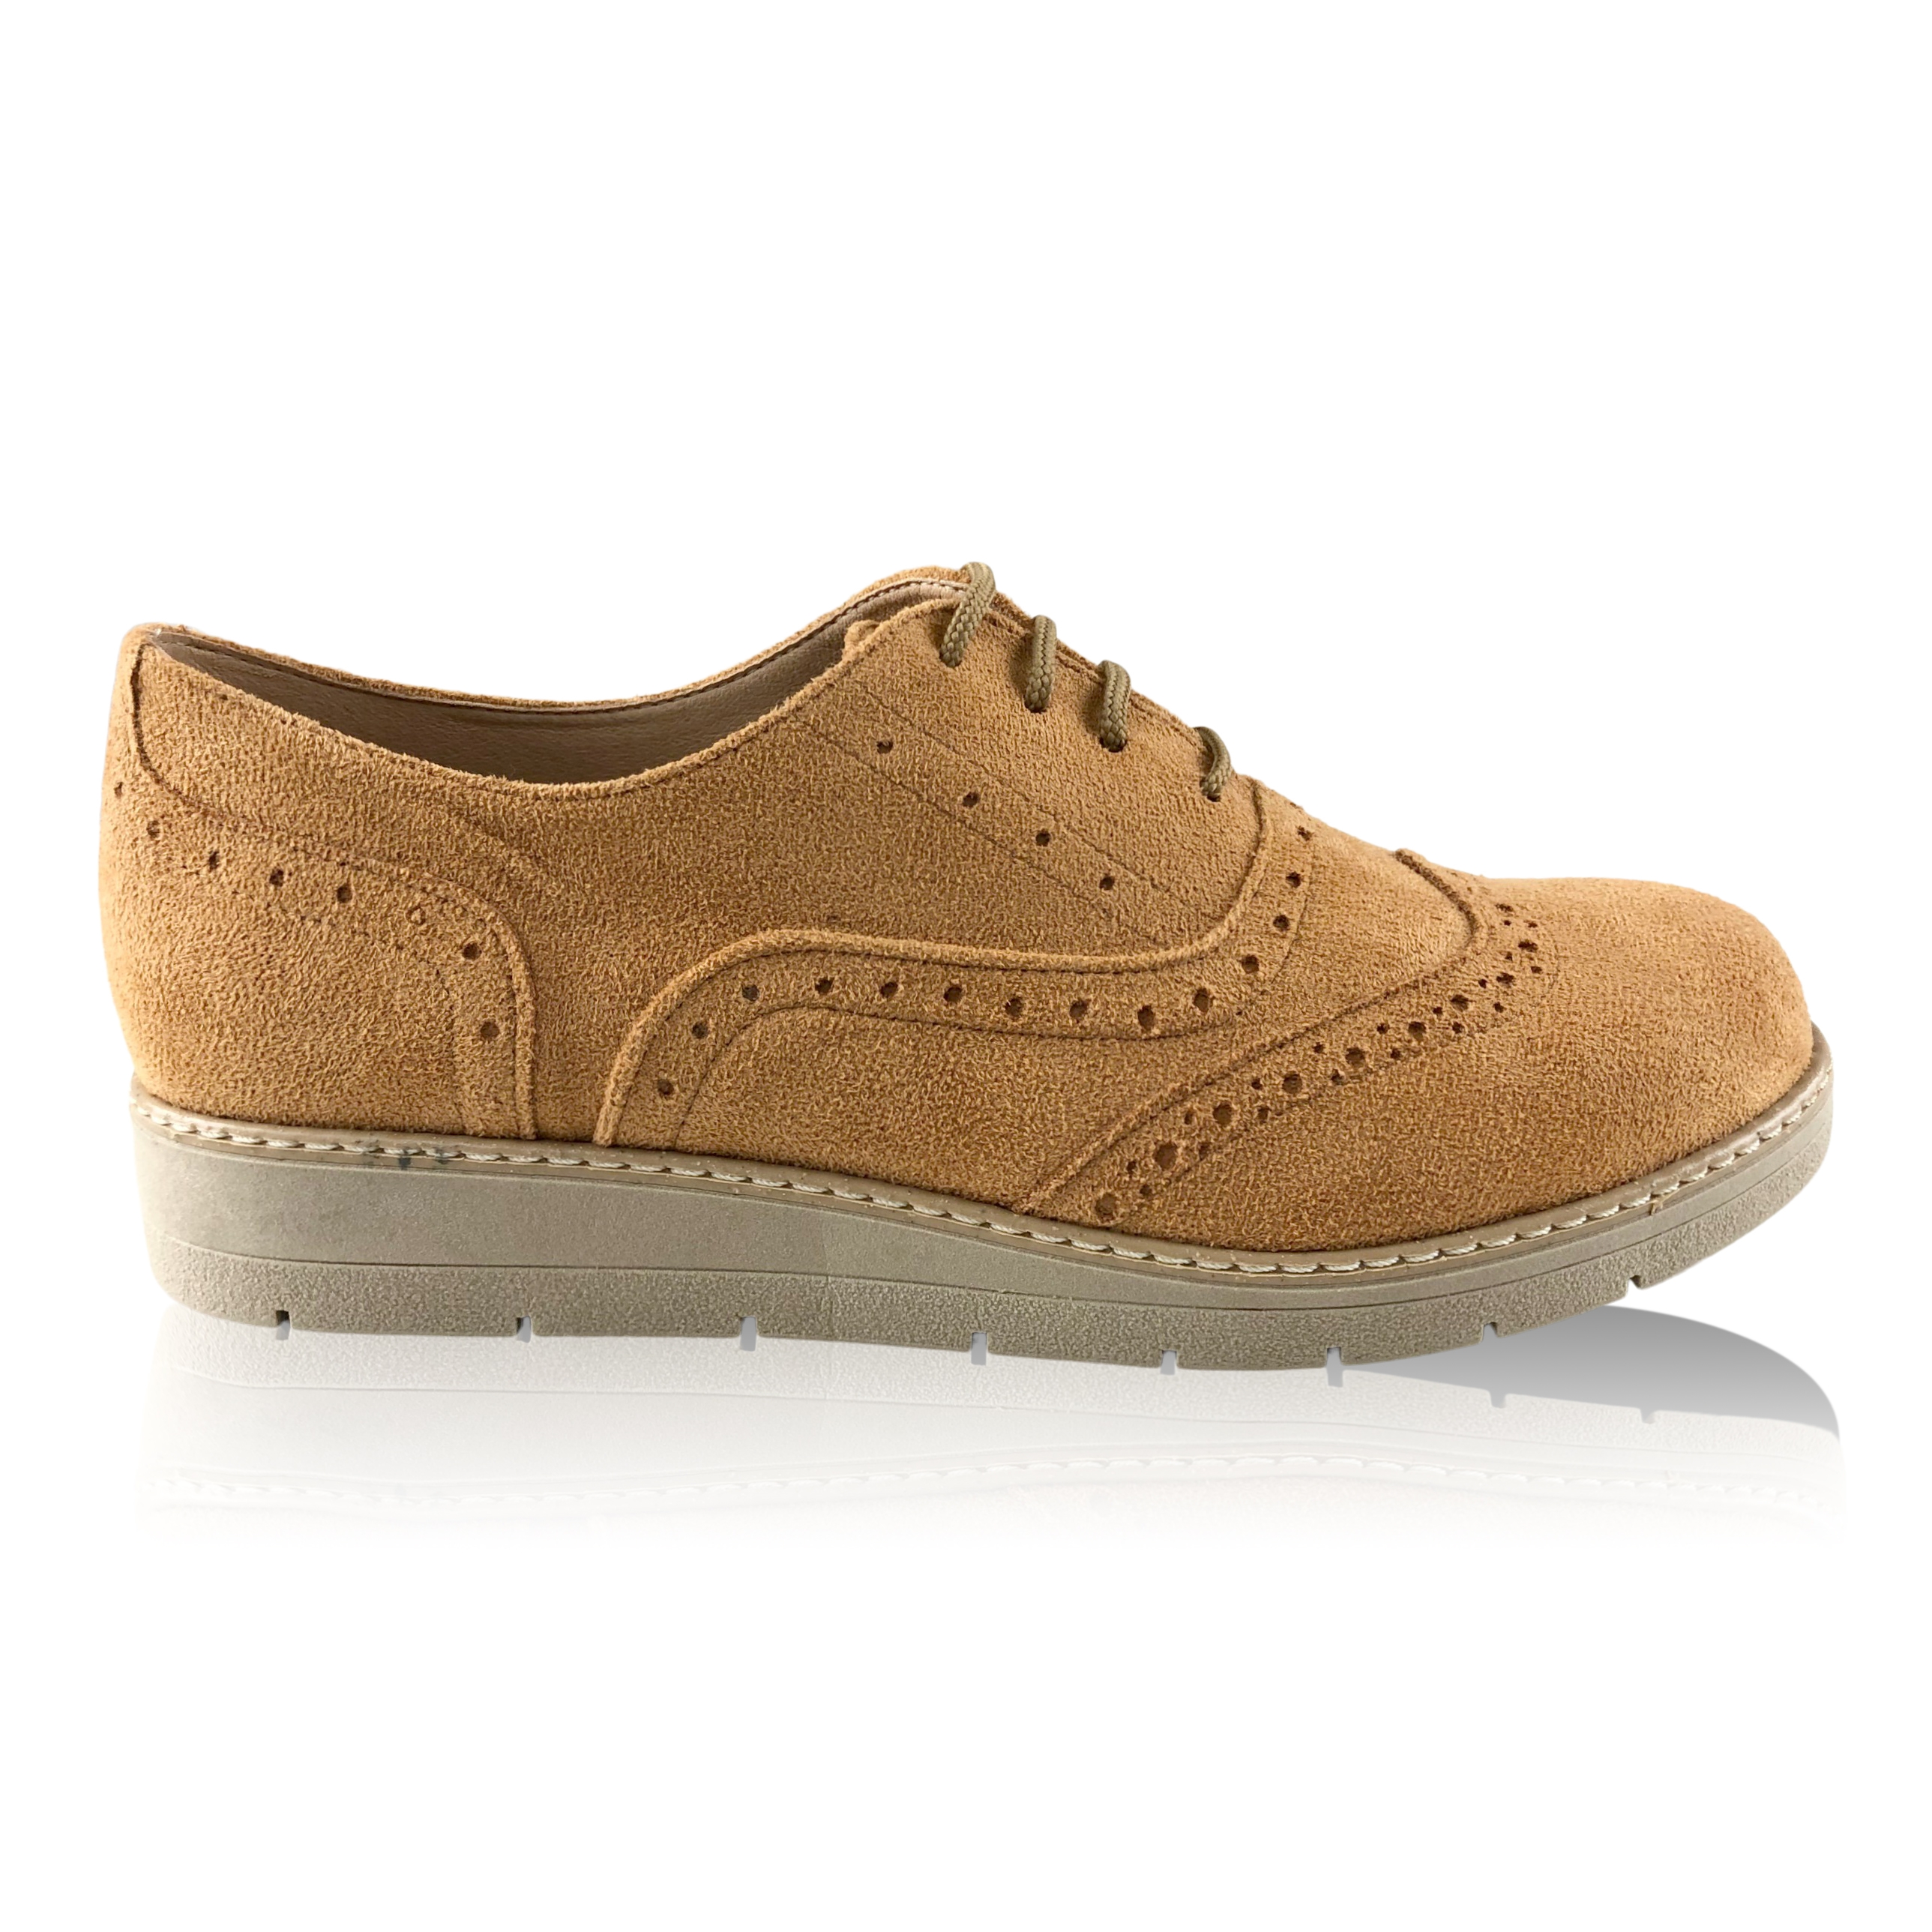 OX-120 Oxfords Ταμπά ΠΑΠΟΥΤΣΙΑ/CASUAL/OXFORDS/